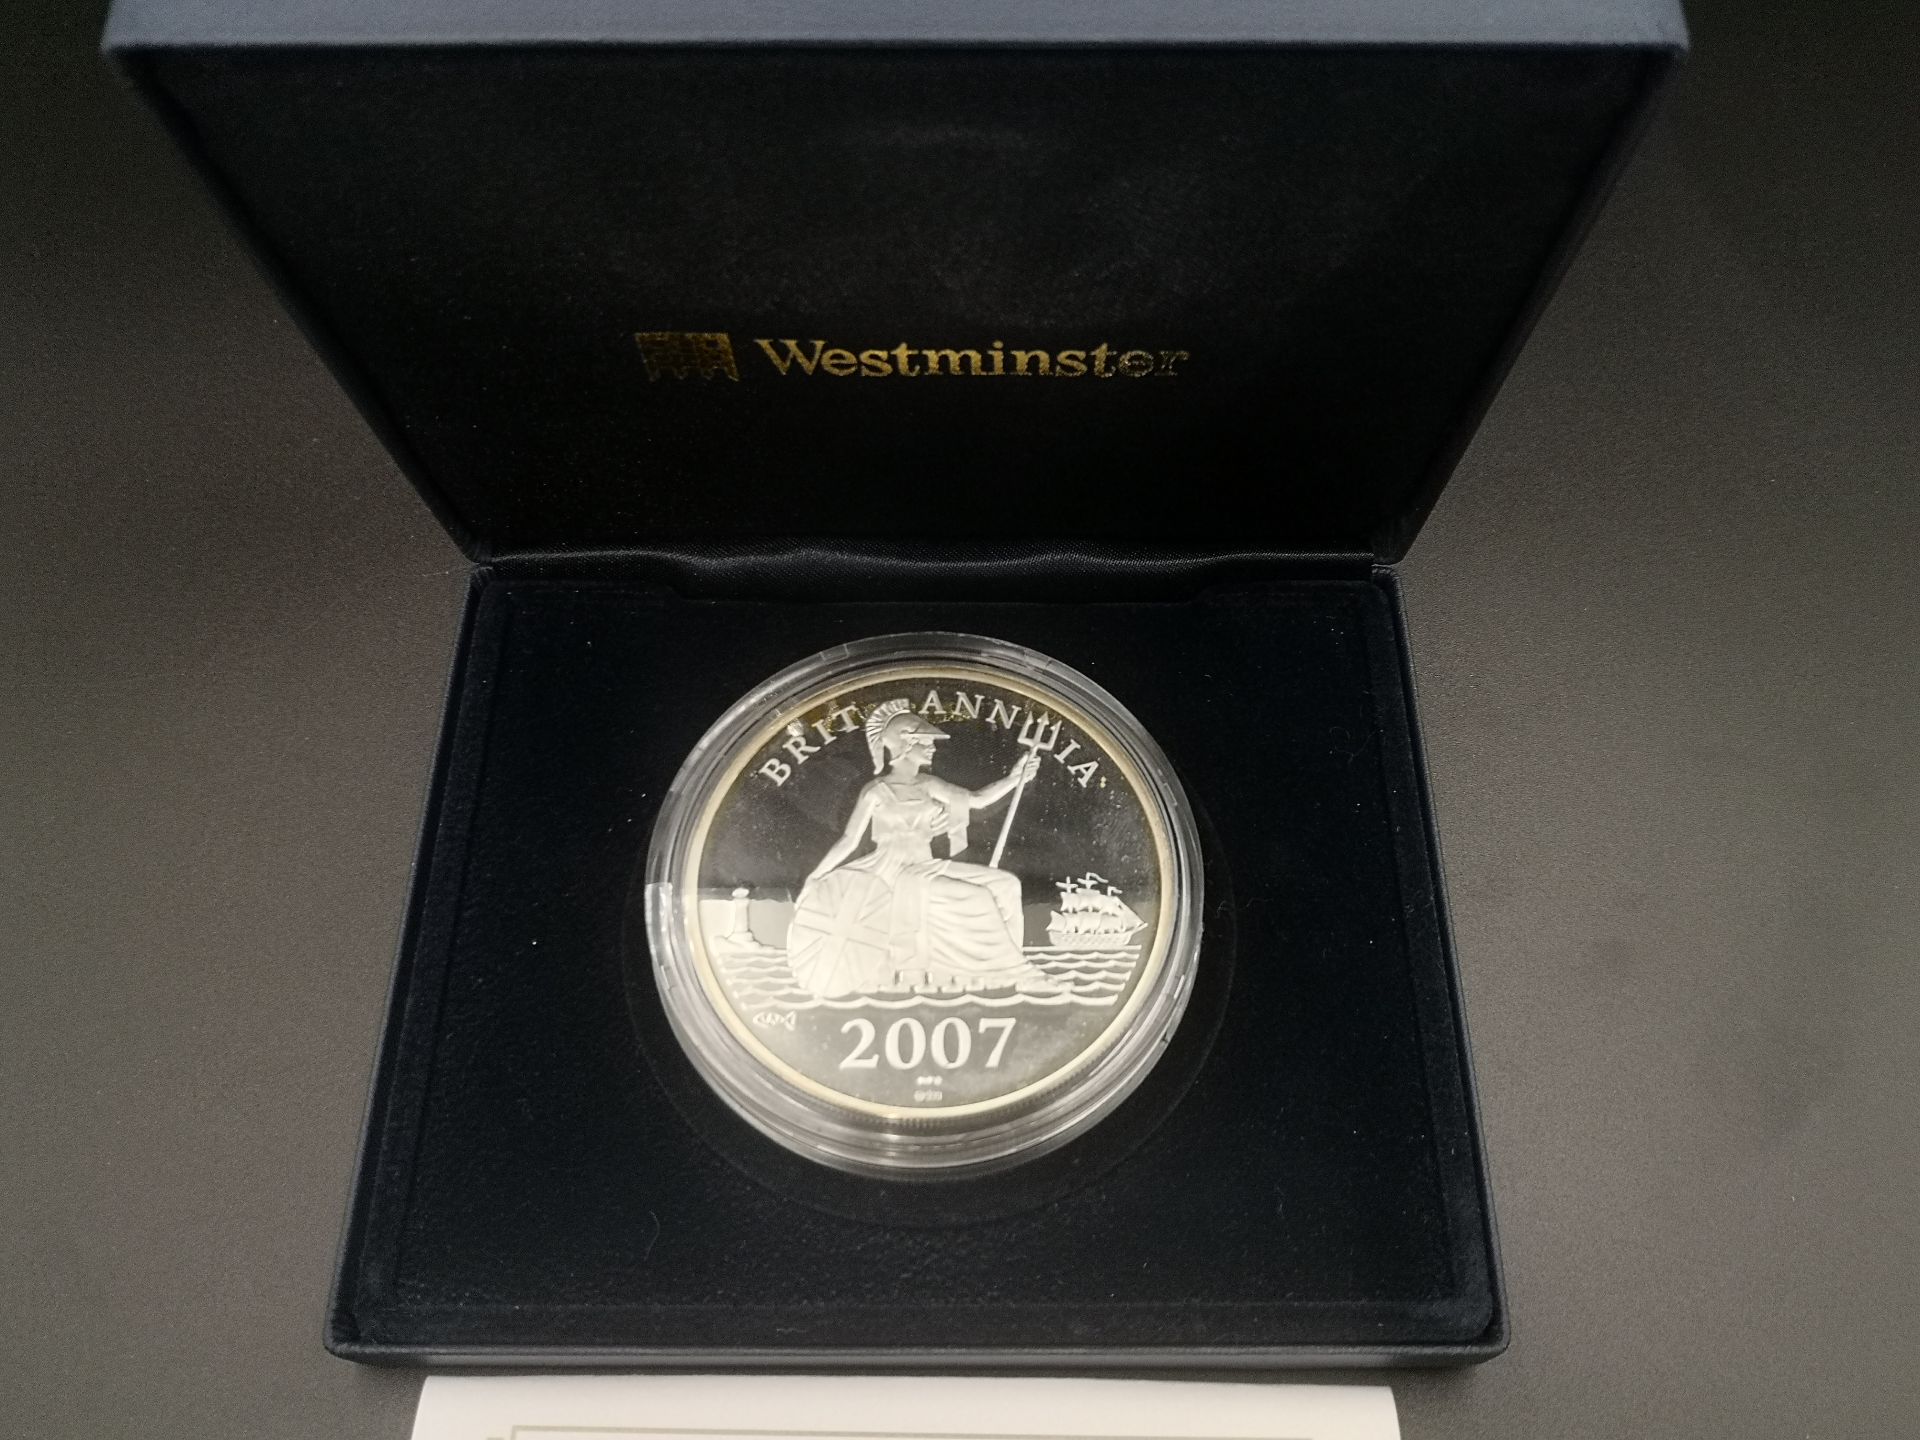 Westminster Diamond Wedding silver commemorative coin - Image 3 of 4